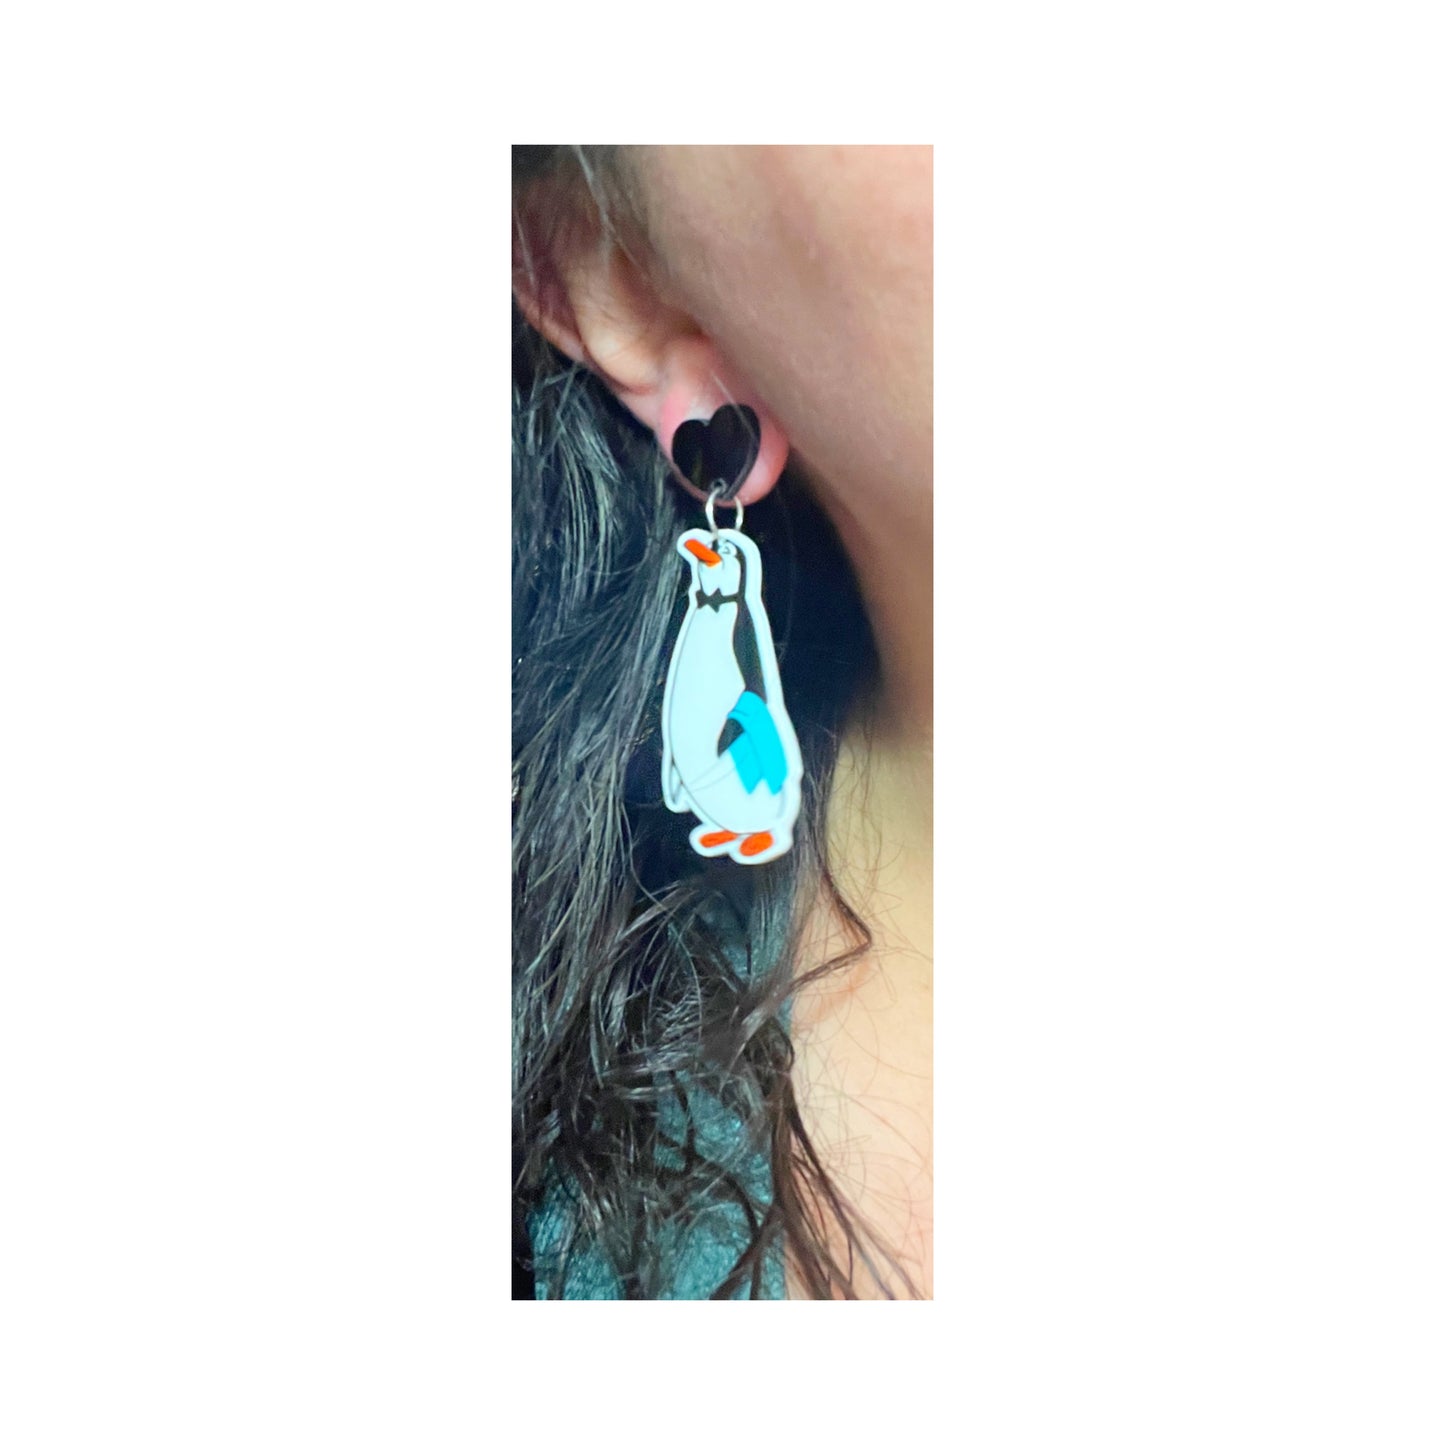 Jolly Holiday Poppins Penguin Drop Earrings